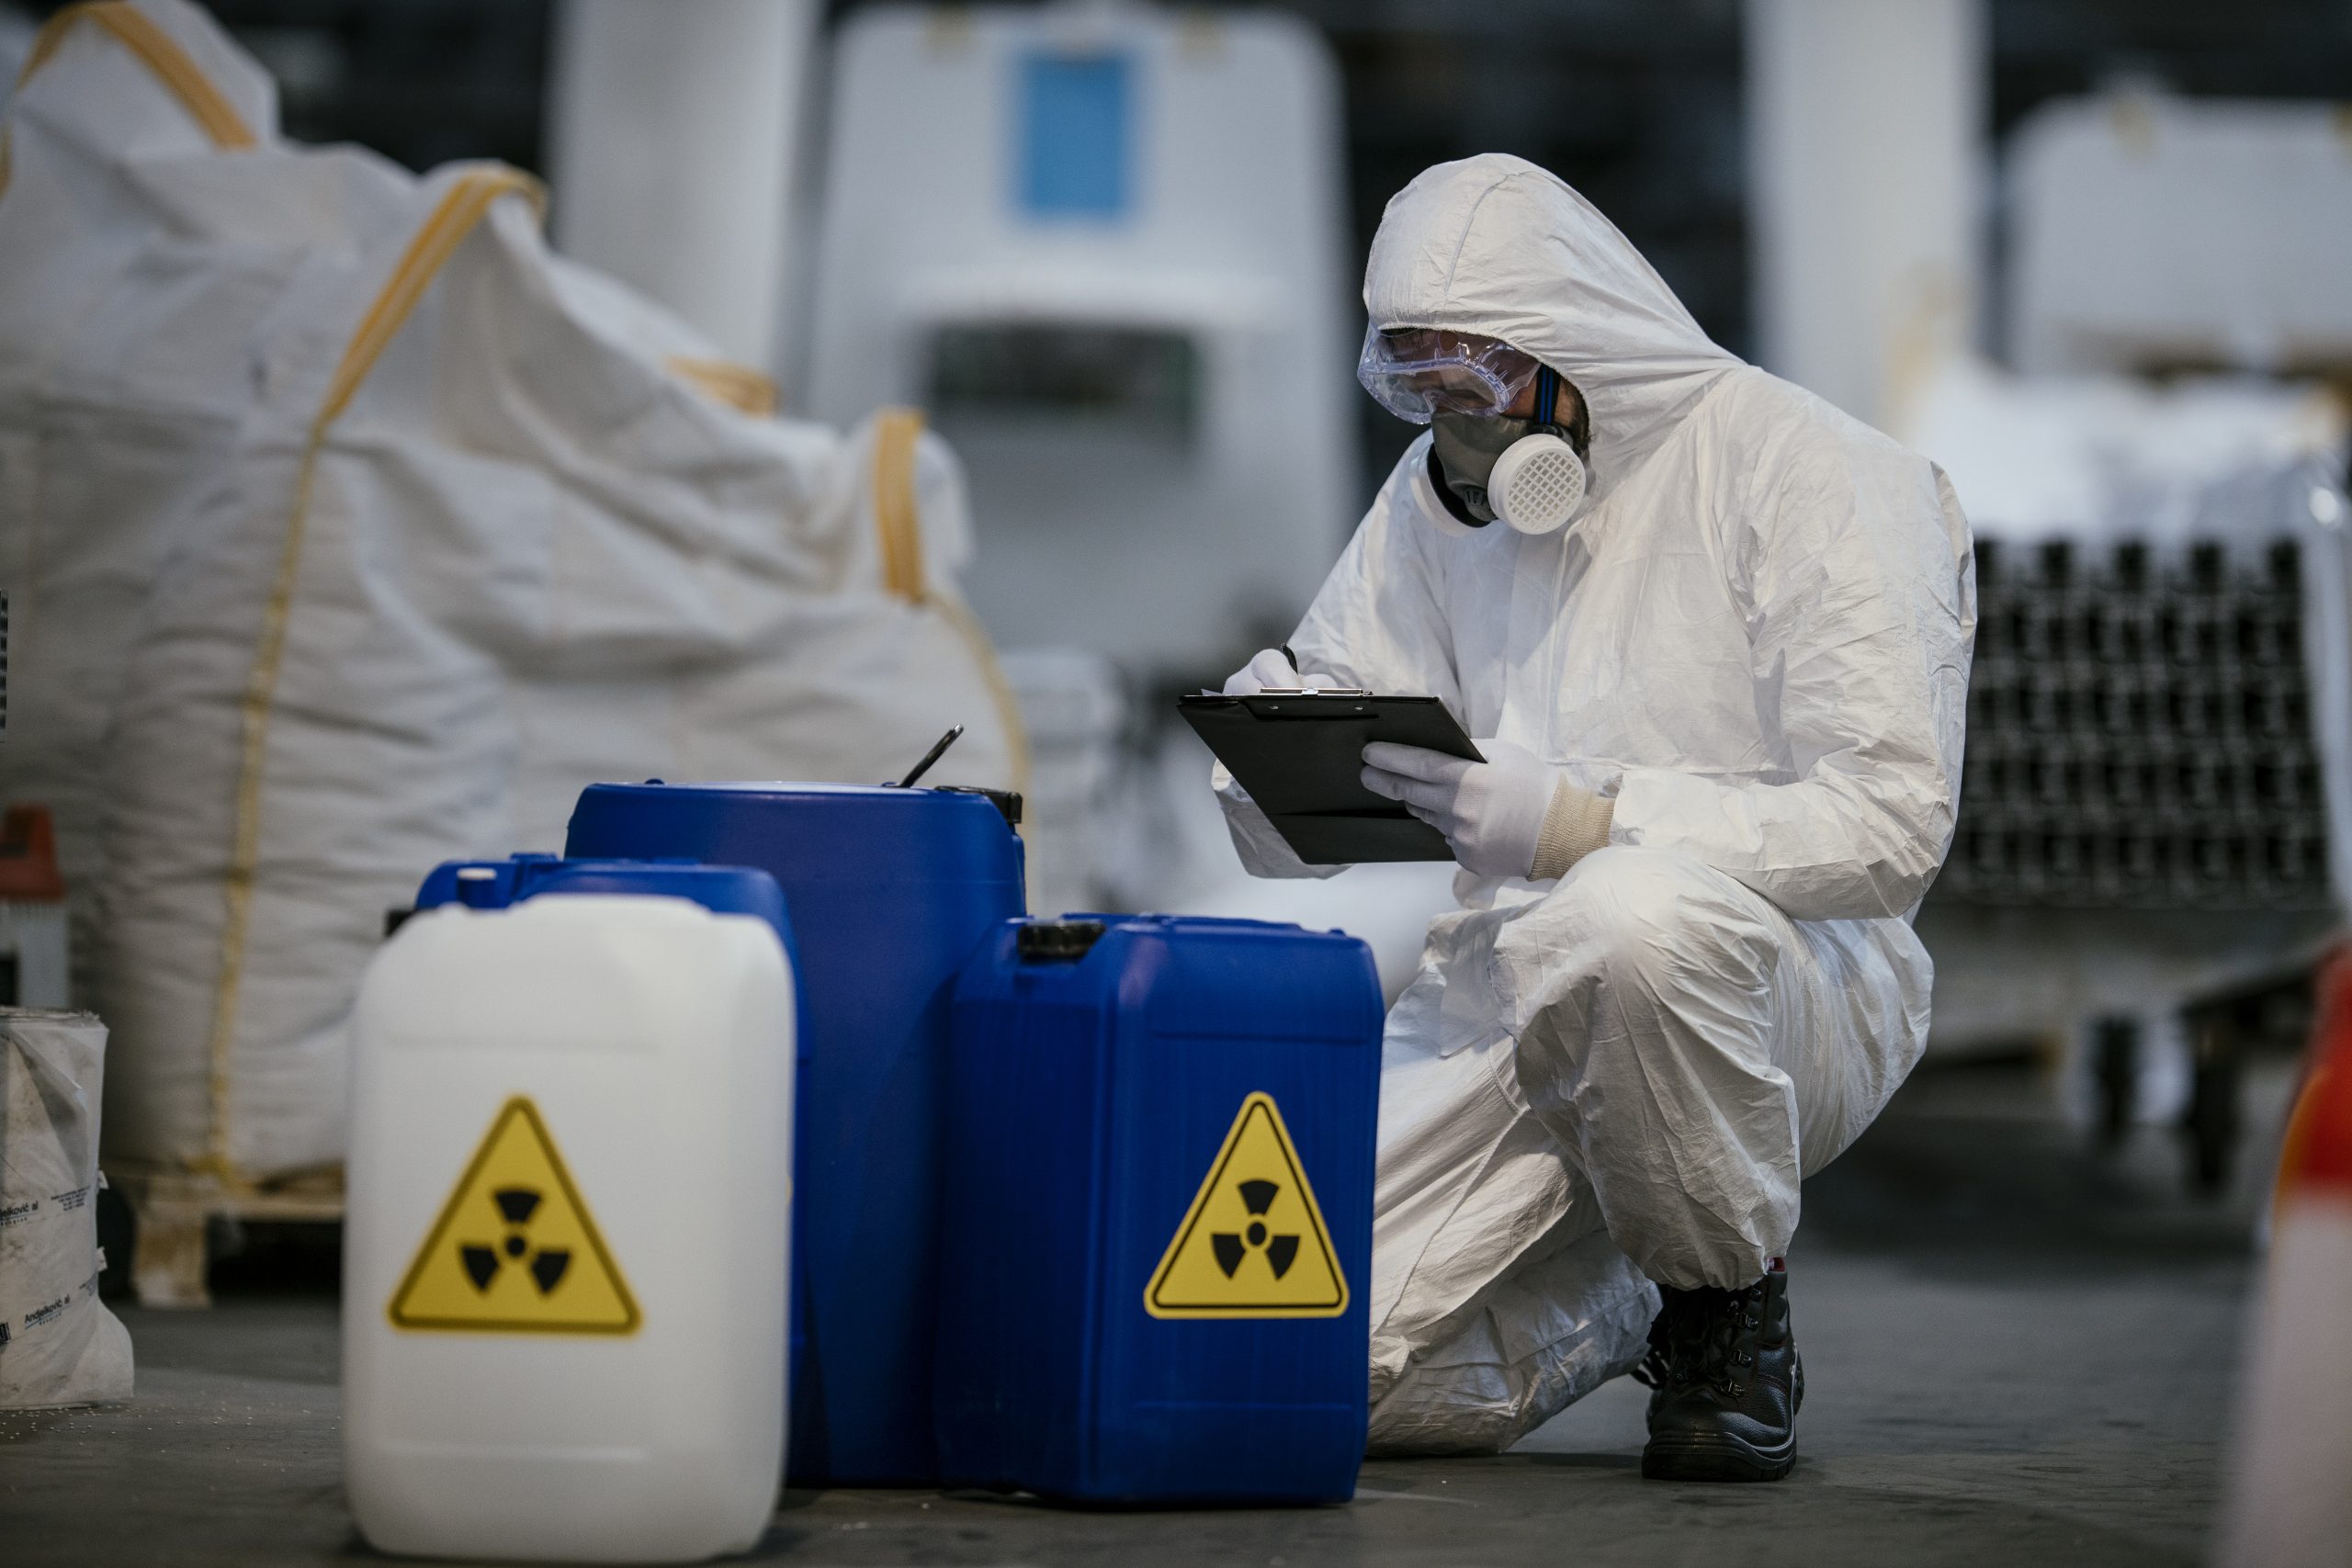 A worker in a protective suit and mask inspects a digital tablet while sitting beside blue chemical containers marked with hazard symbols in a warehouse.